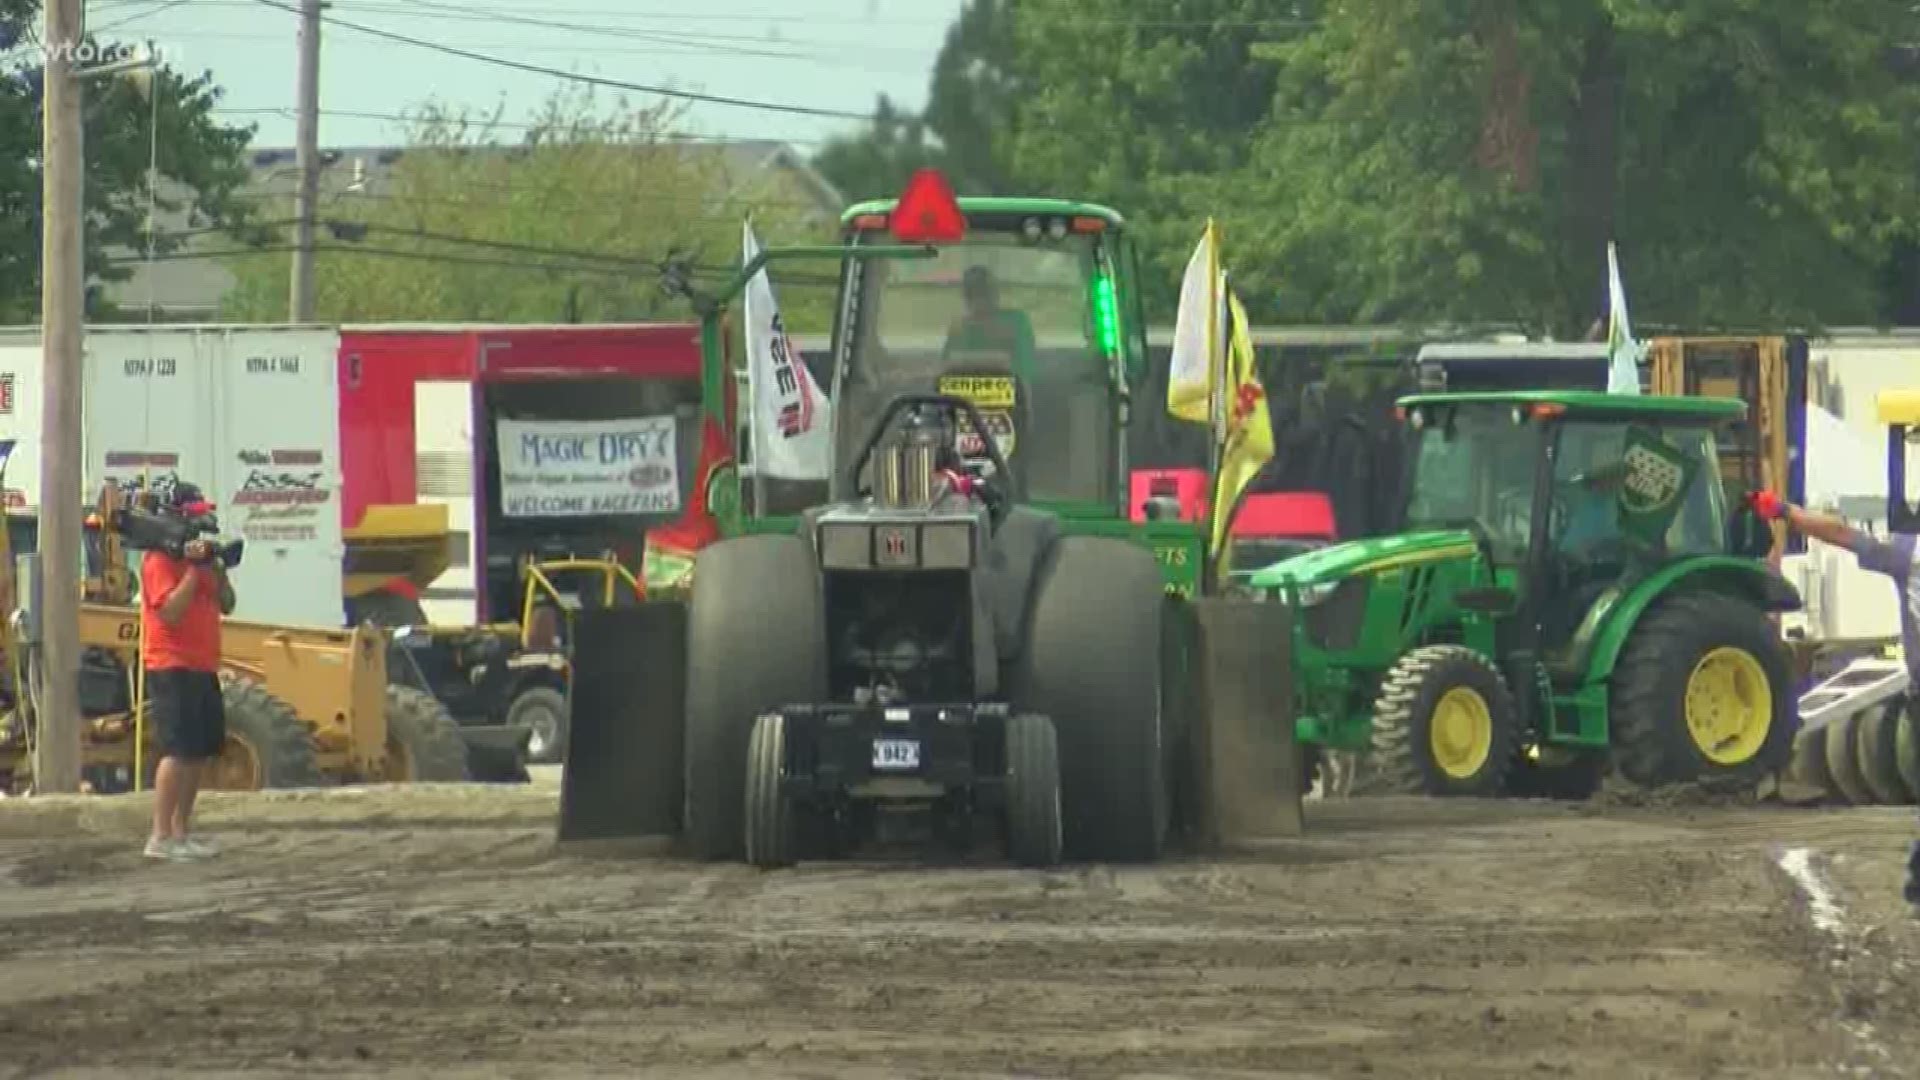 Thousands of dollars in prize money are at stake in this roaring, ground shaking National Tractor Pulling Championships at the Wood County Fairgrounds.